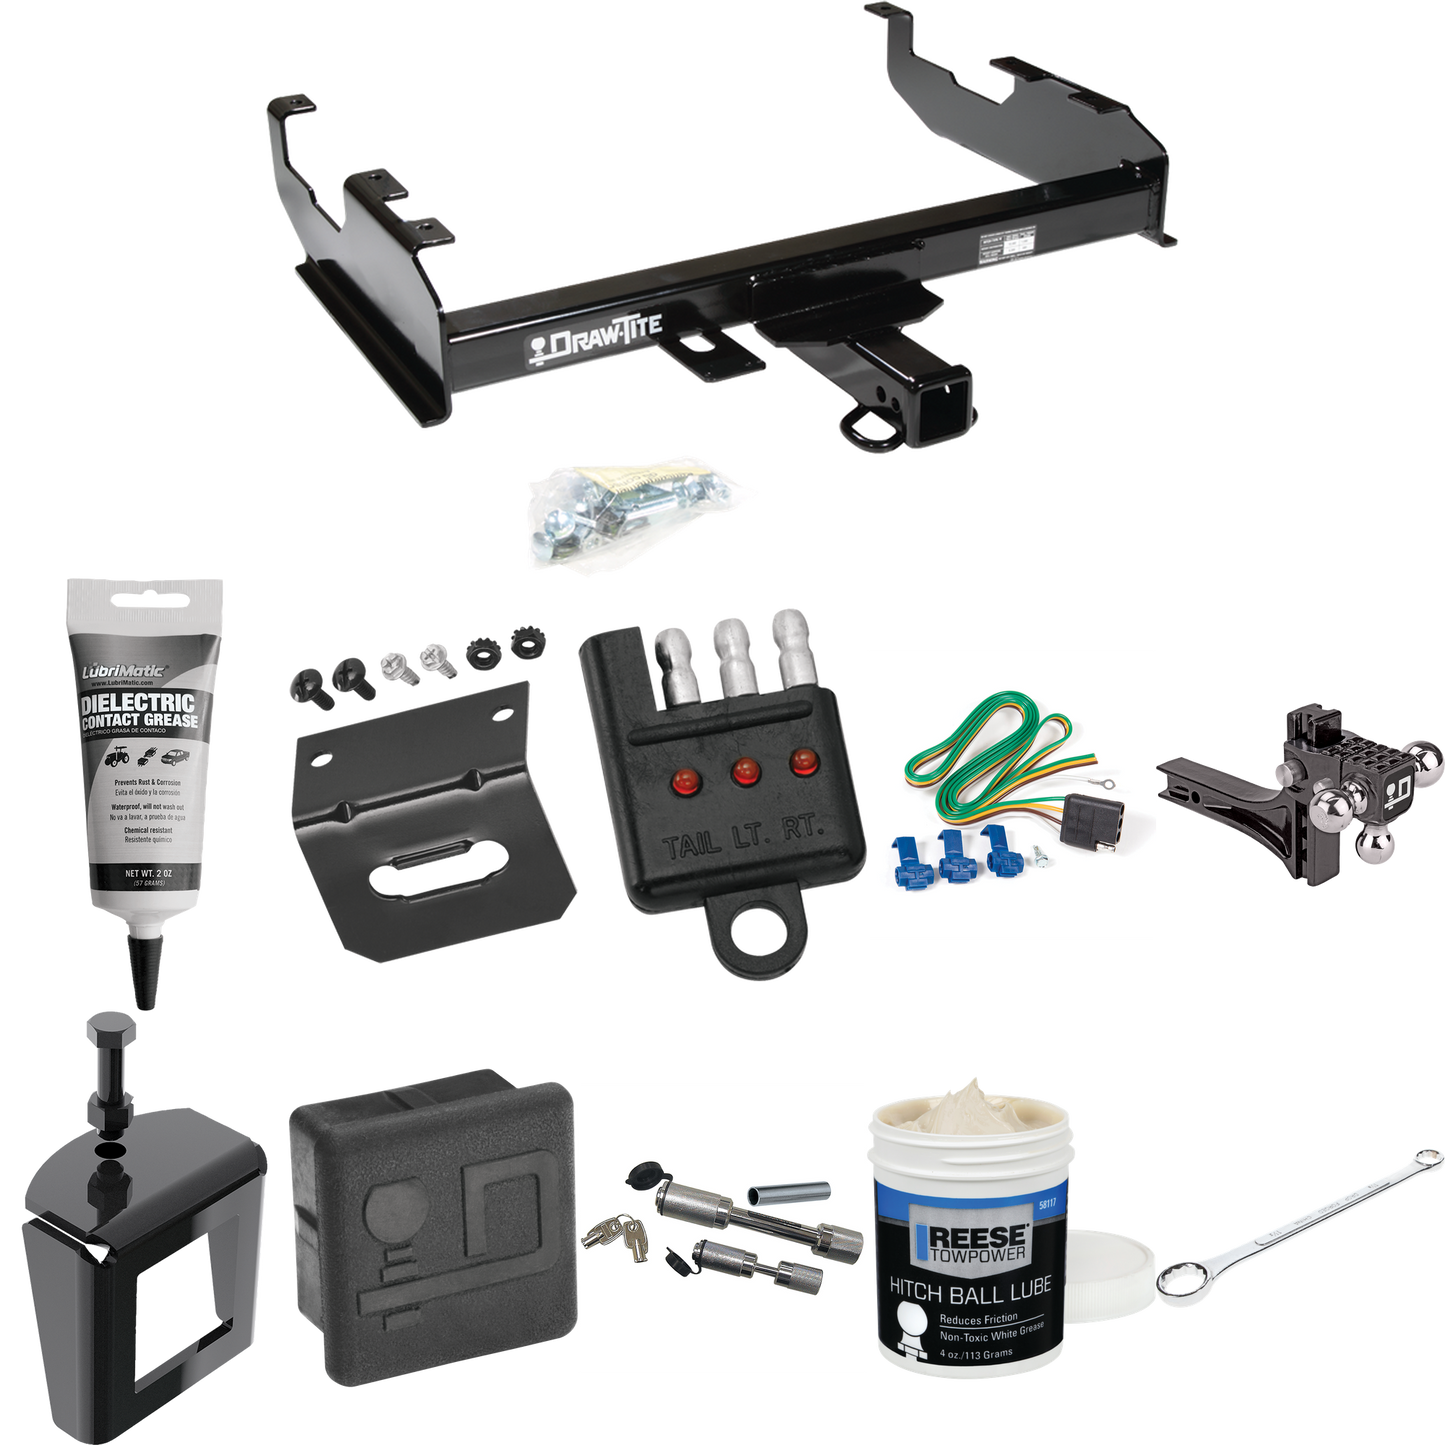 Fits 1963-1972 Chevrolet C10 Trailer Hitch Tow PKG w/ 4-Flat Wiring + Adjustable Drop Rise Triple Ball Ball Mount 1-7/8" & 2" & 2-5/16" Trailer Balls + Wiring Bracket + Hitch Cover + Dual Hitch & Coupler Locks + Wiring Tester + Ball Lube + Electric G